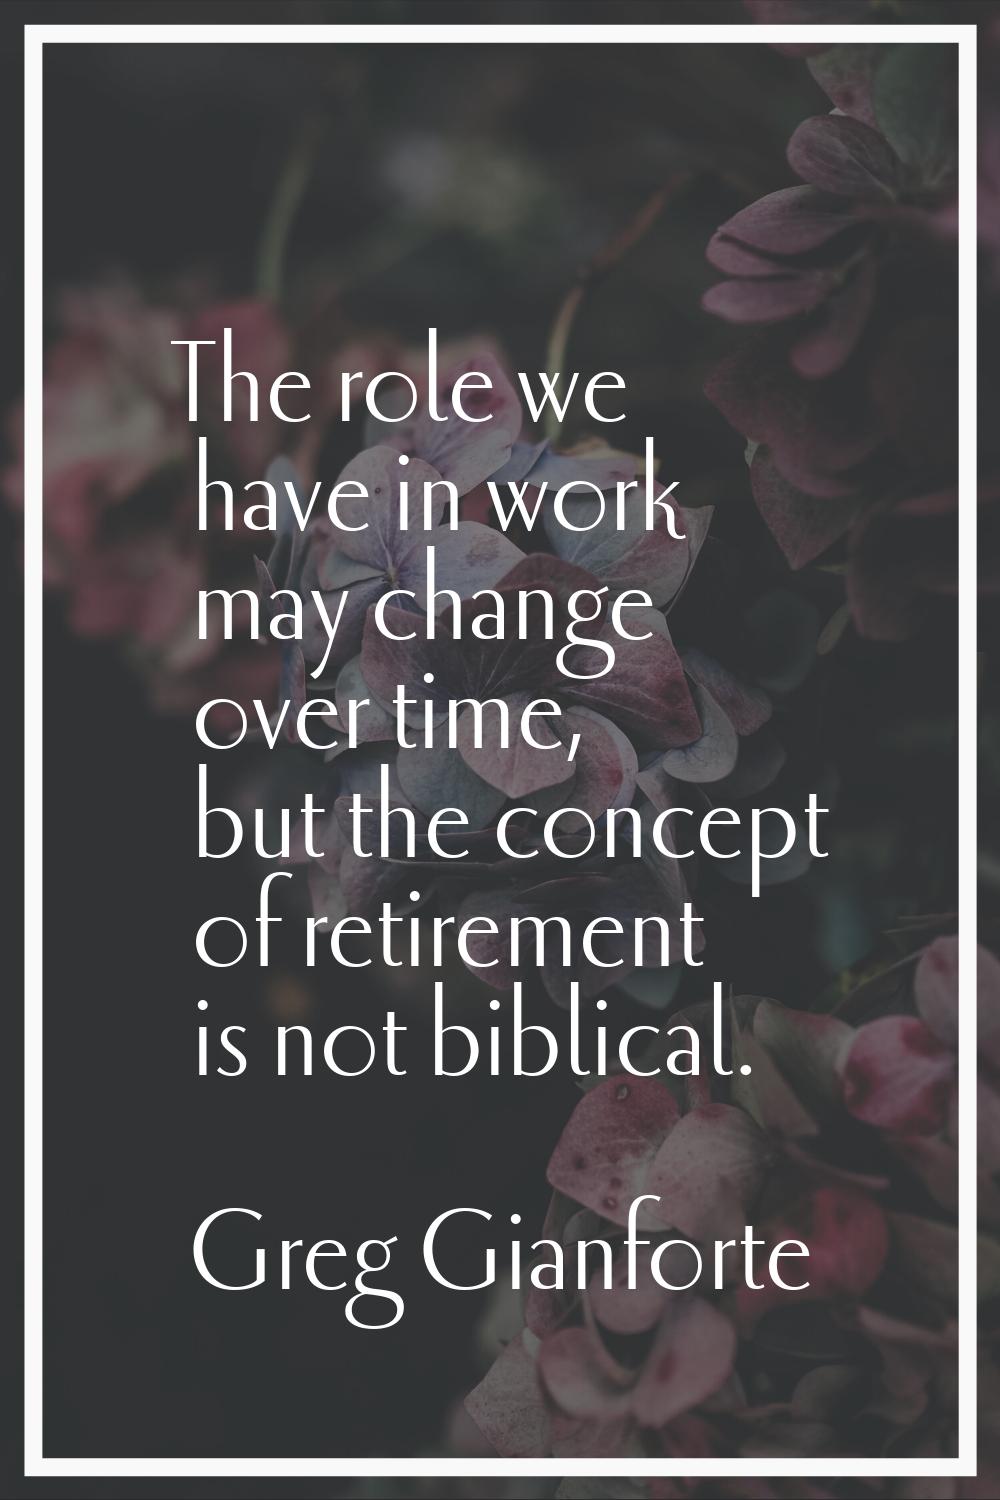 The role we have in work may change over time, but the concept of retirement is not biblical.